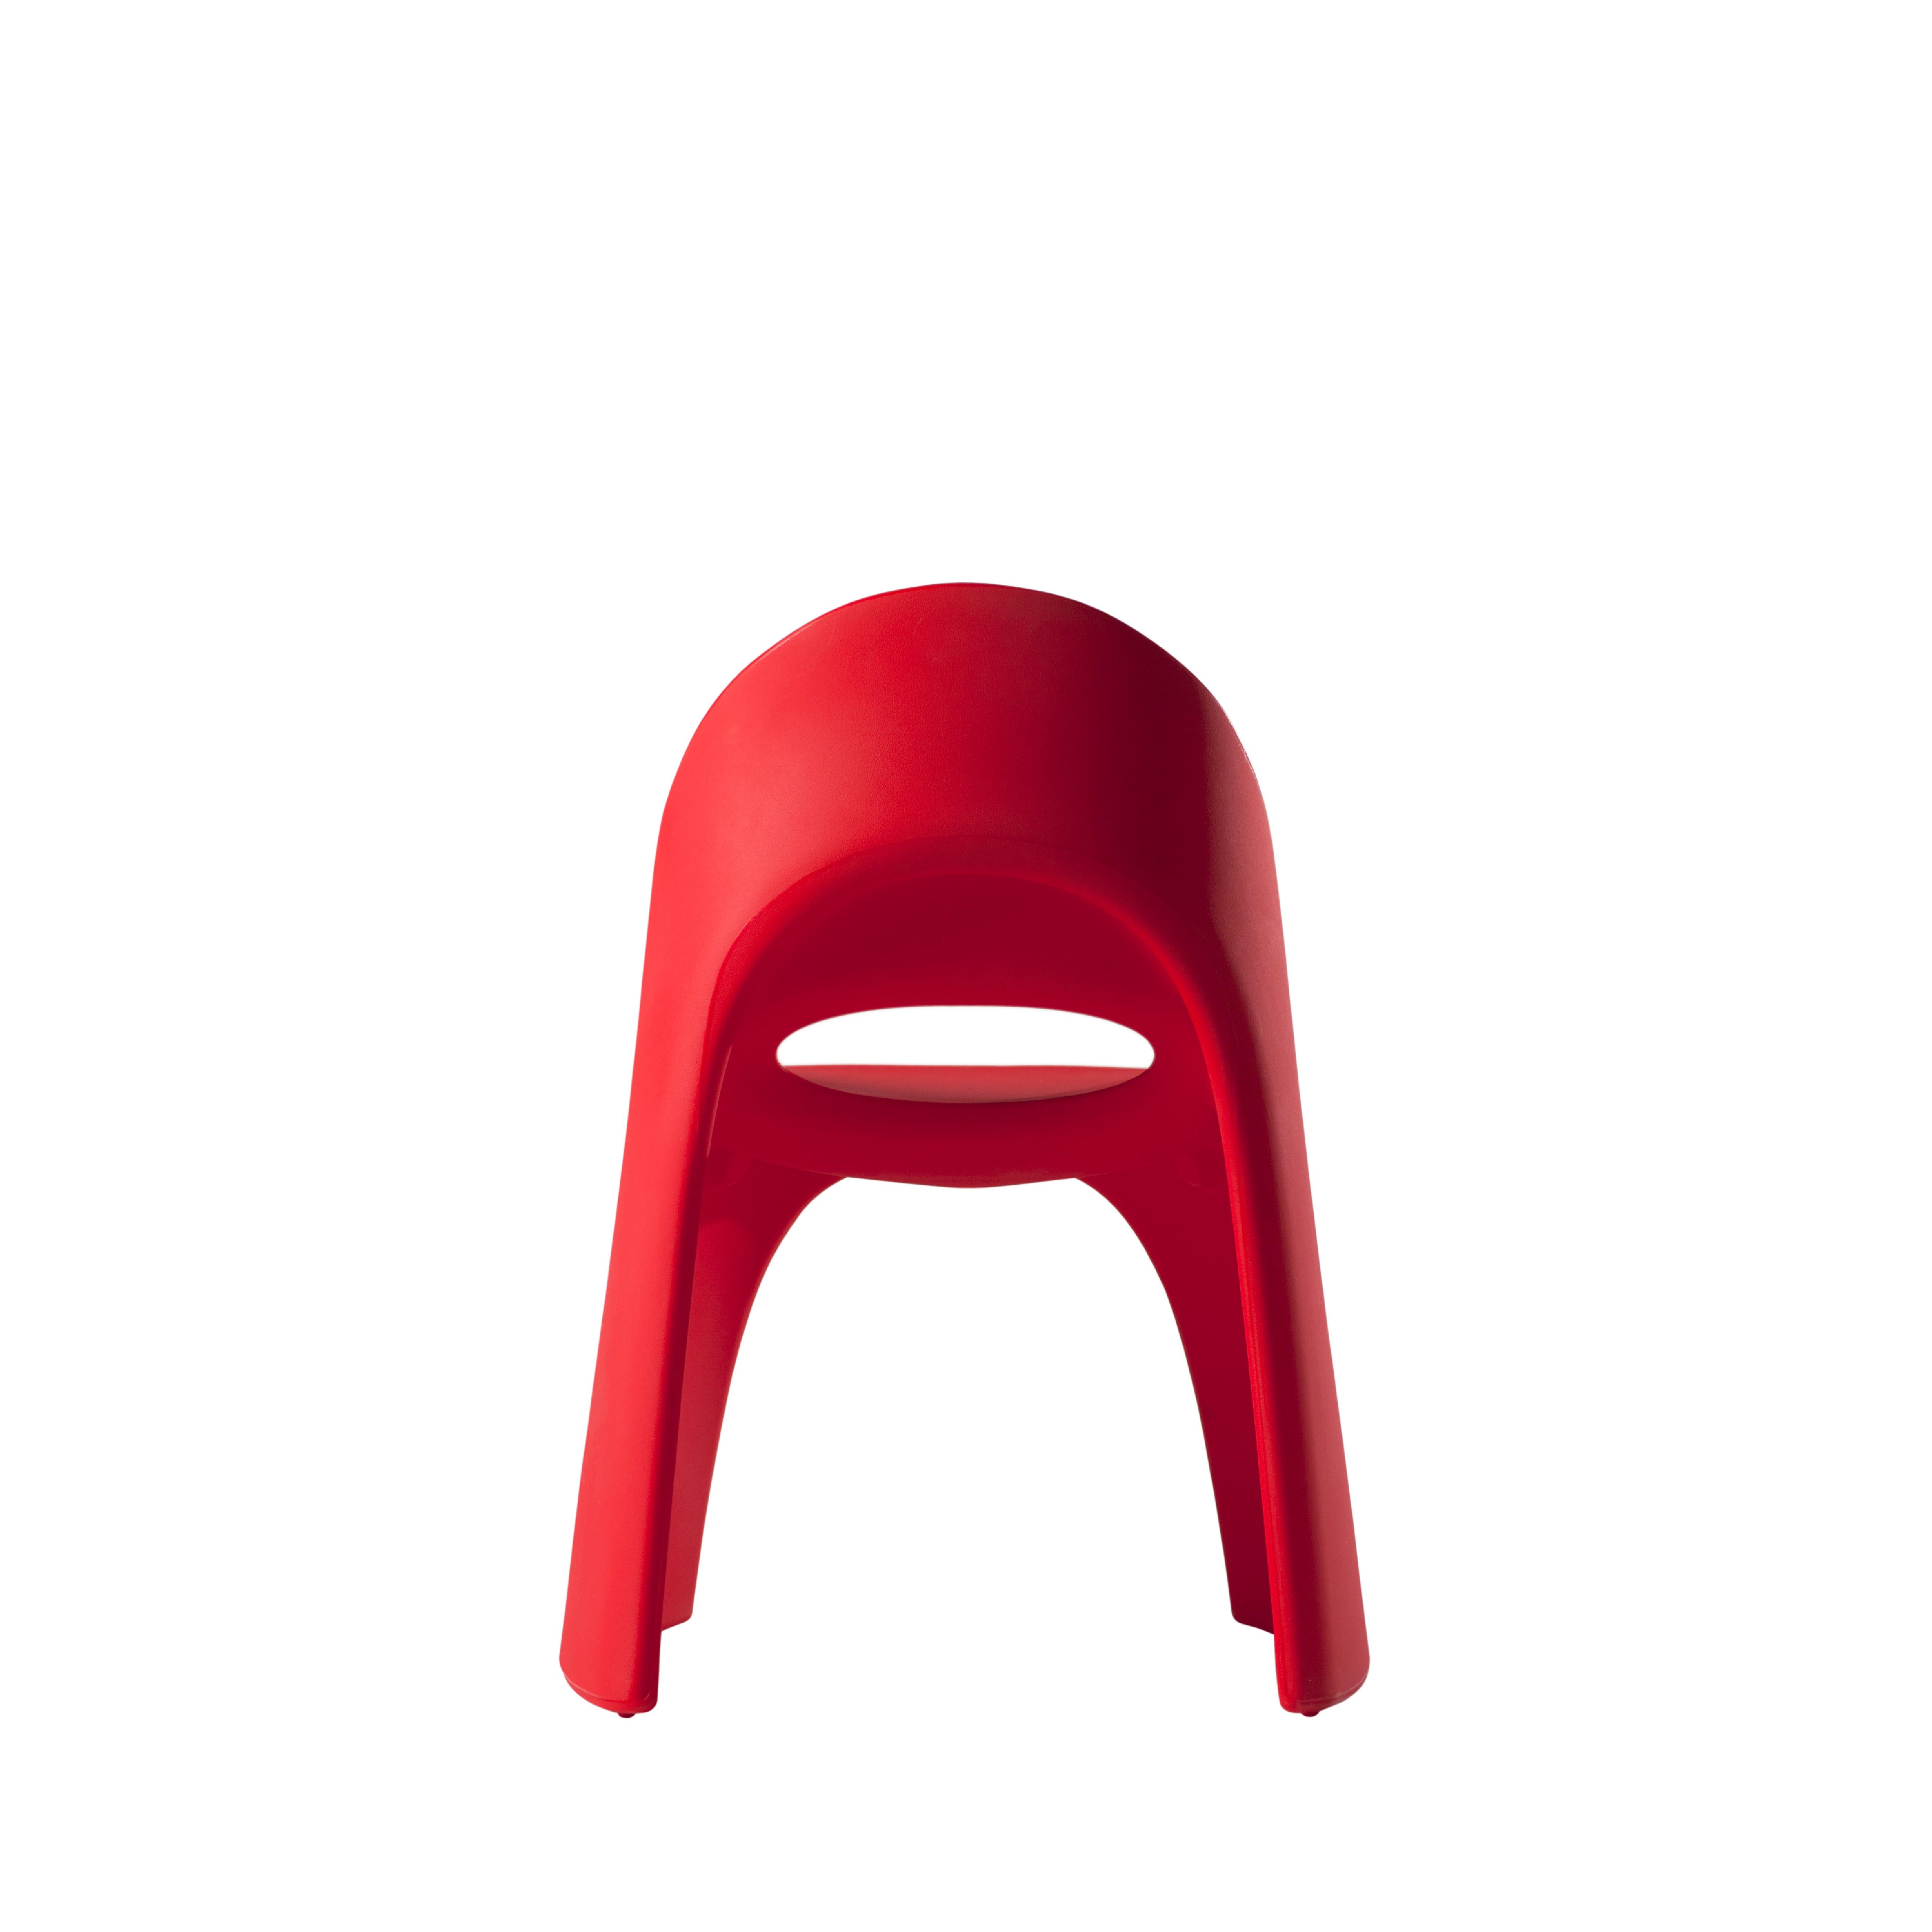 Slide Design Amélie Chair in Flame Red by Italo Pertichini In New Condition For Sale In Brooklyn, NY